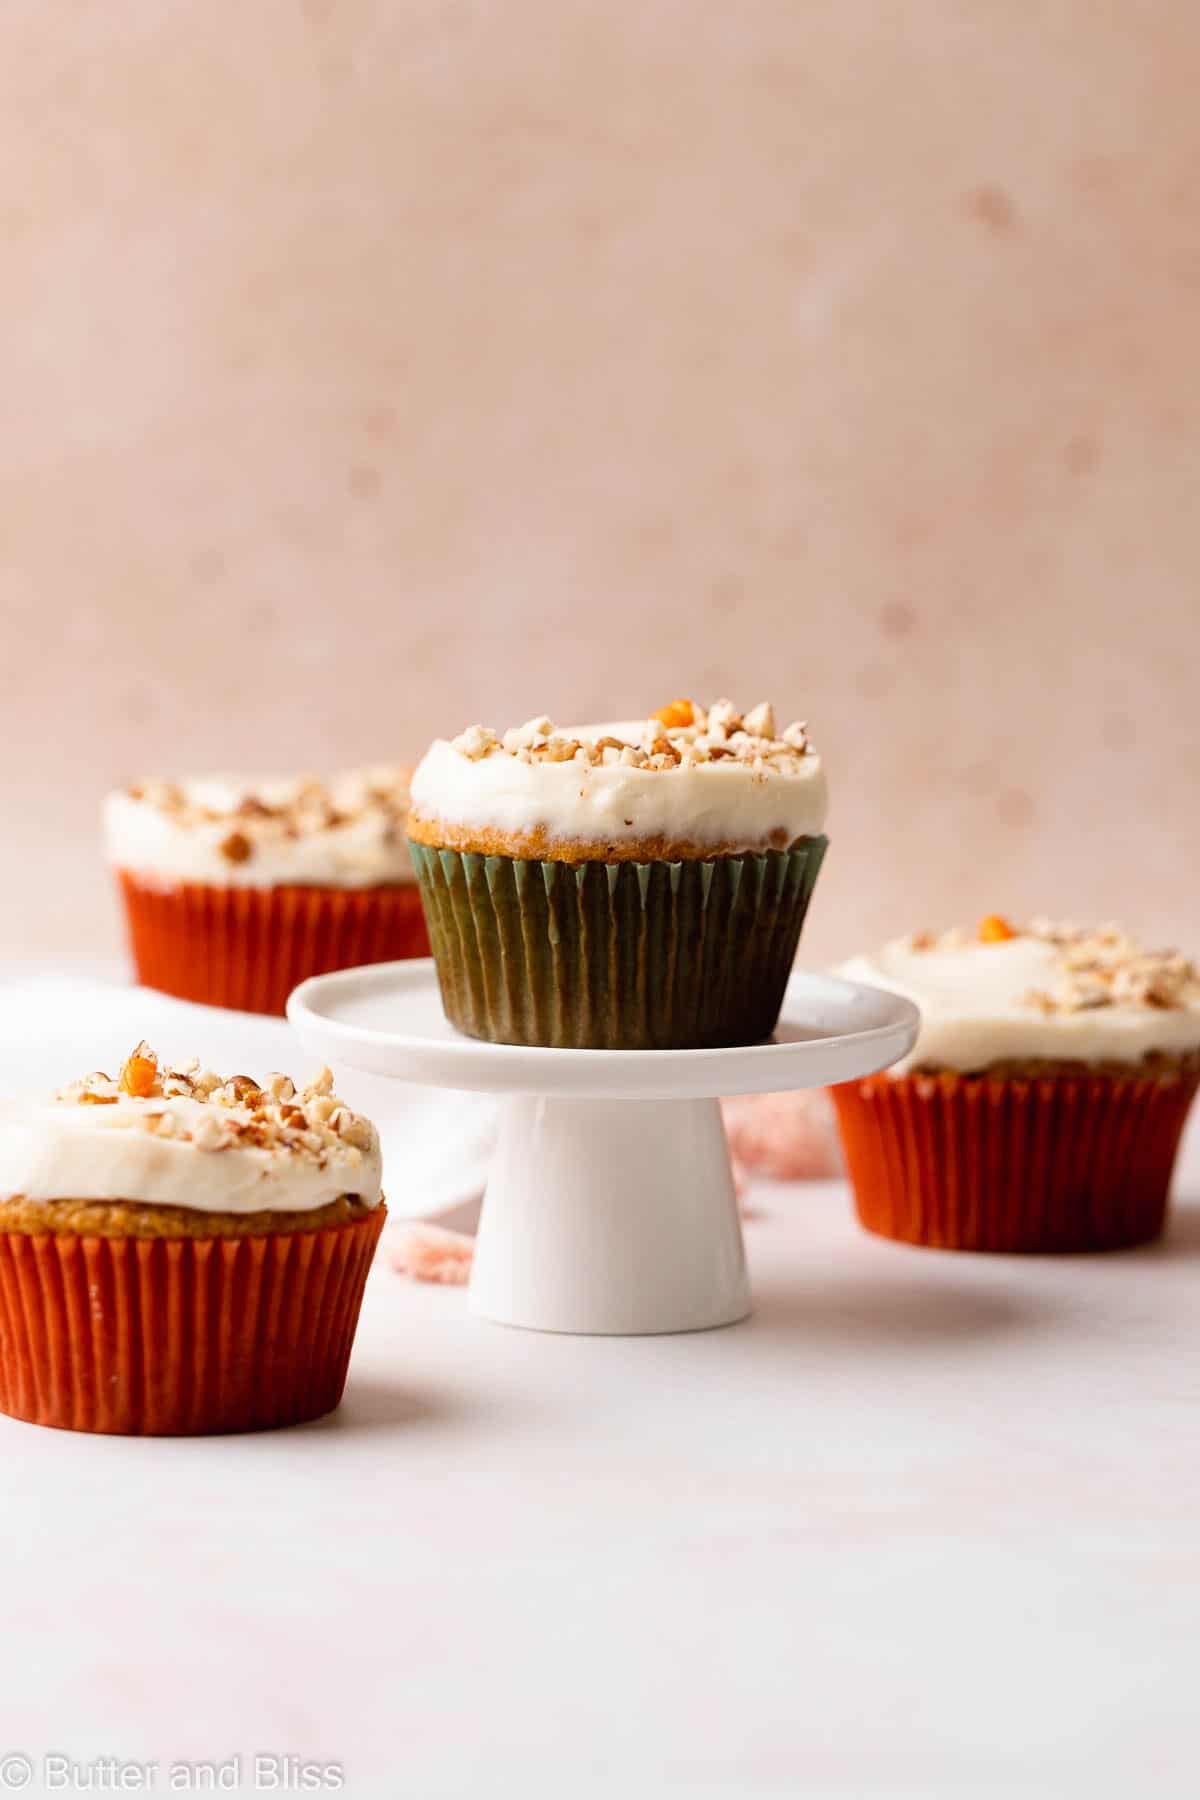 Carrot cake cupcake with cream cheese frosting on a mini cupcake stand